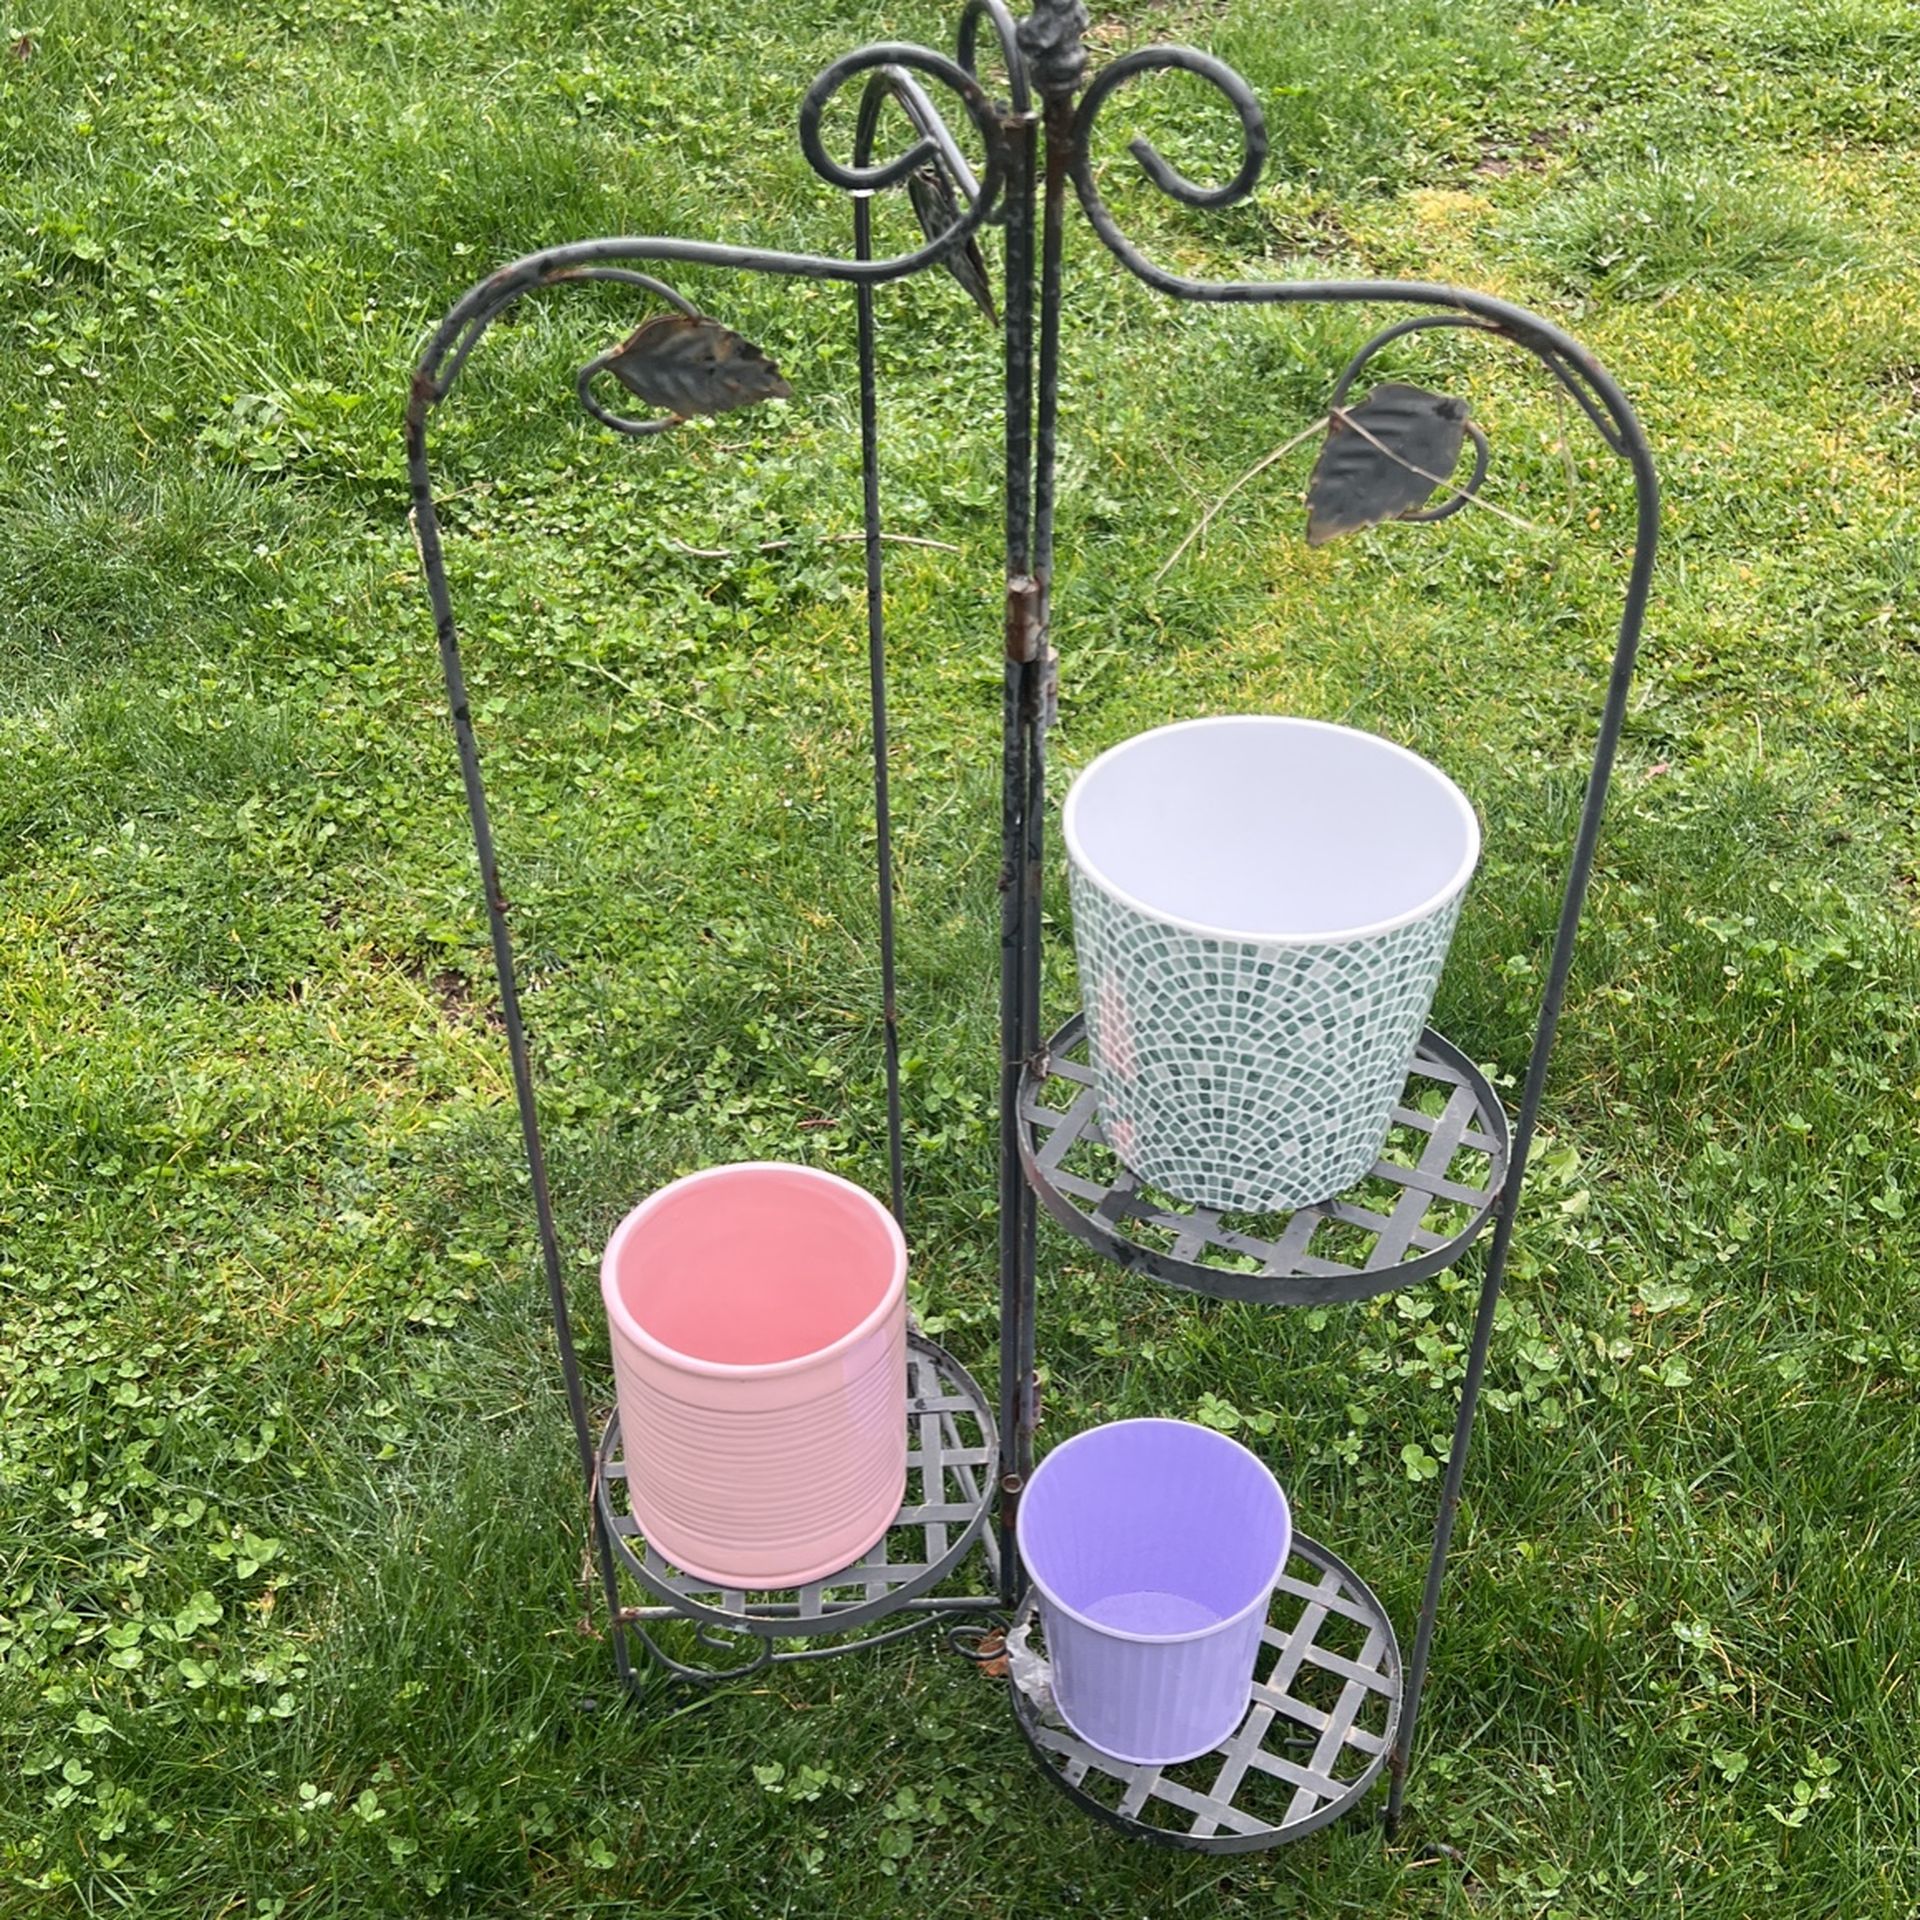 3 Pots Stand For Flowers Pots Are Included And Brand New 